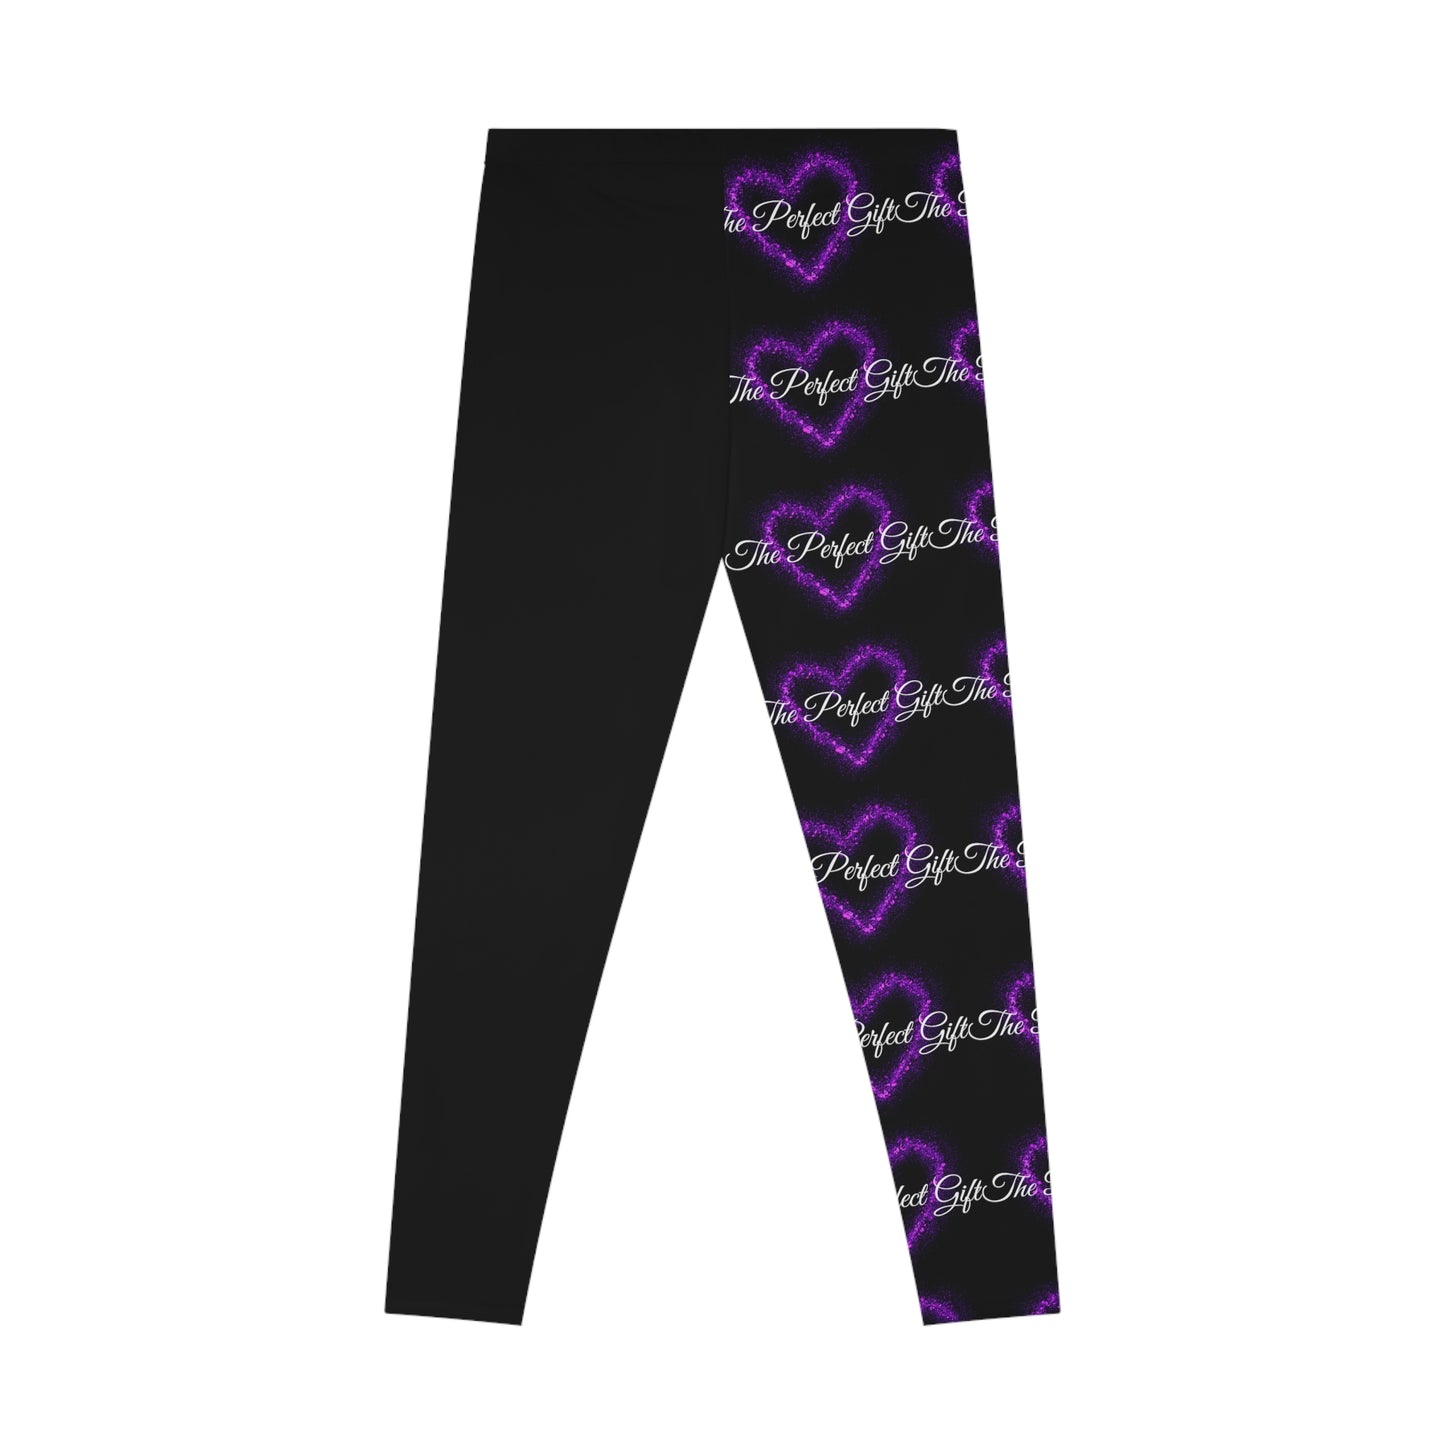 The Perfect Gift, Stretchy Leggings, Valentines Day Gift, Gift For Her, Black Leggings